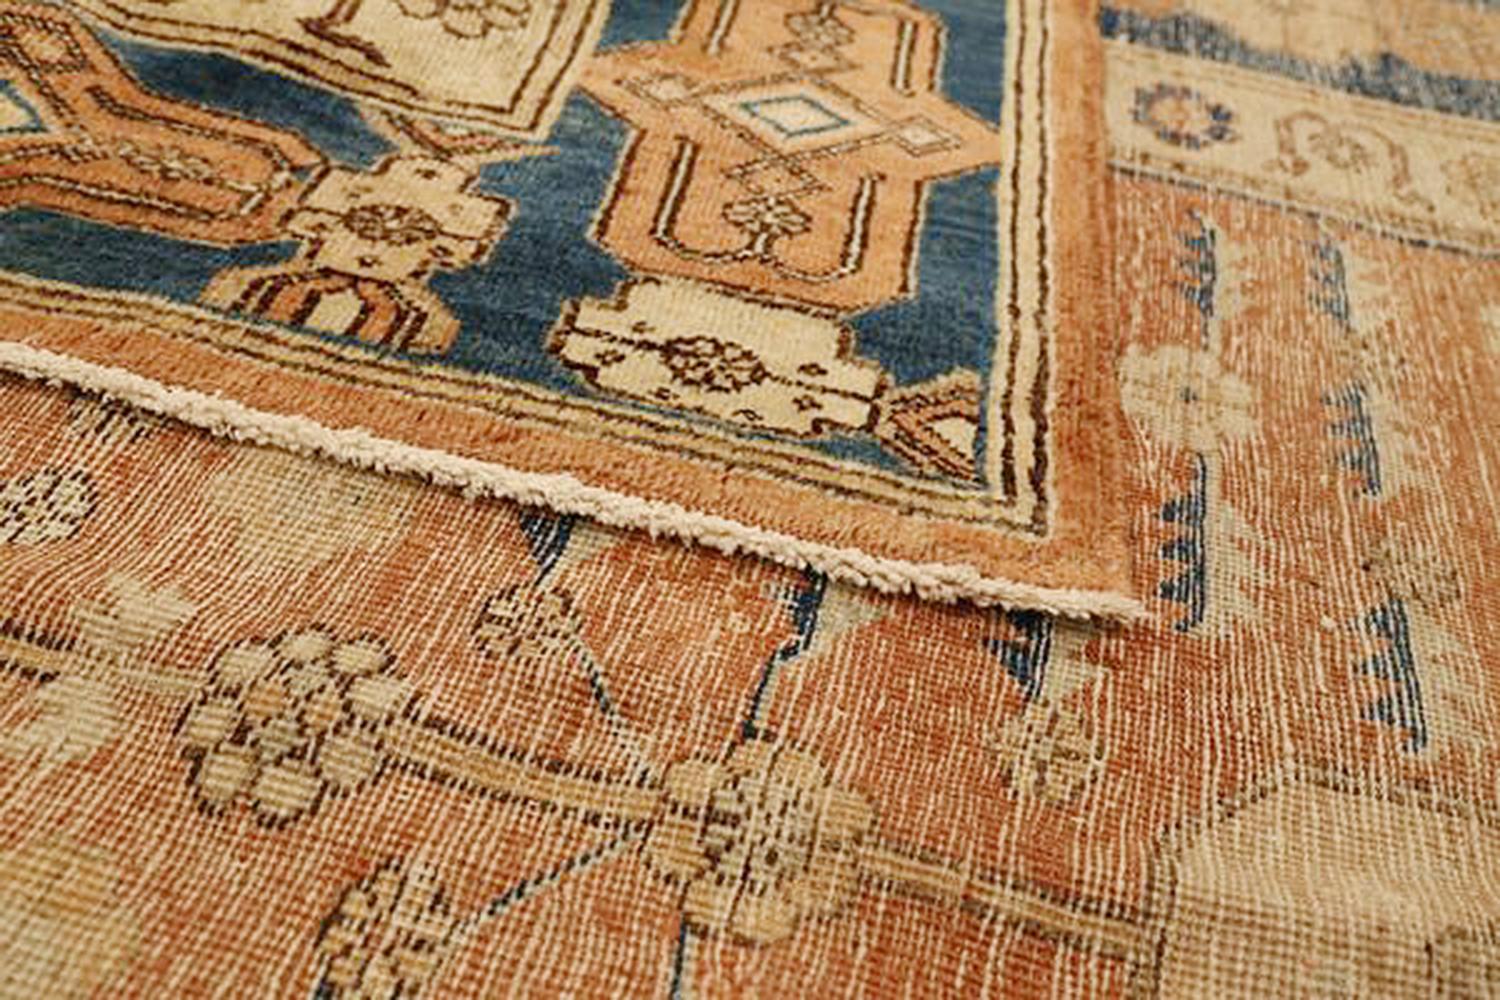 Hand-Woven Antique Russian Khotan Rug with Blue and Beige Floral Patterns on Brown Field For Sale